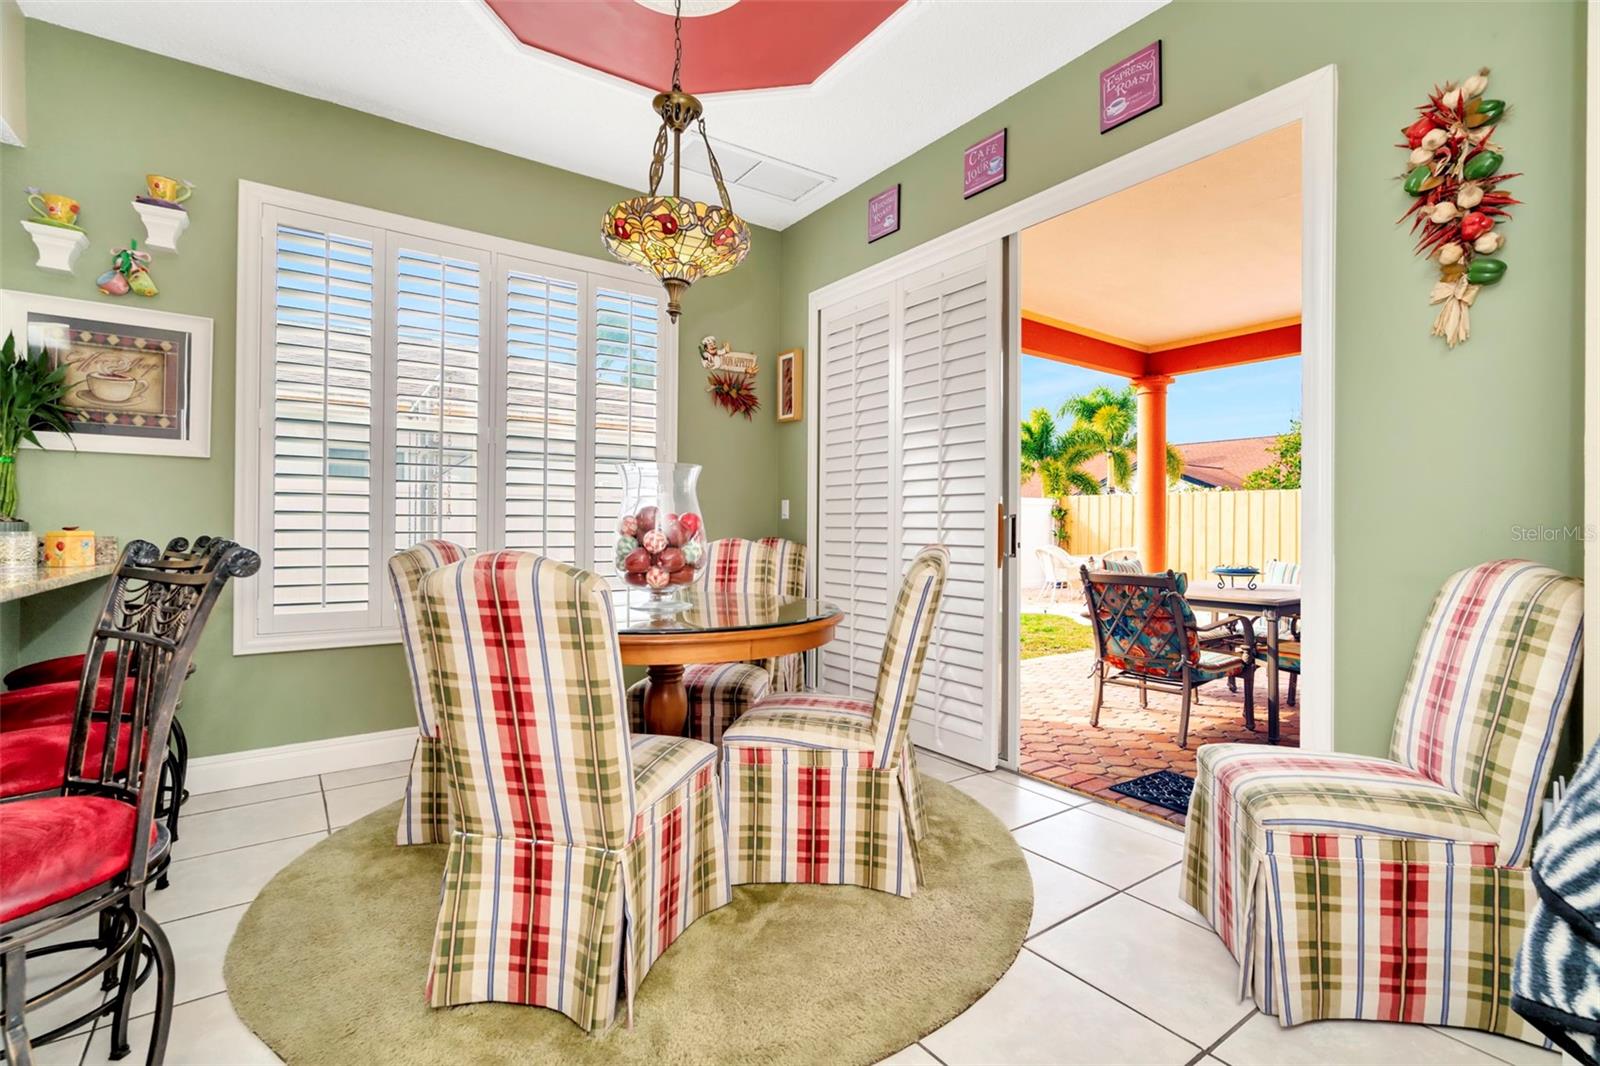 Dinette that open to Back covered porch. Notice Plantation shutter sliders